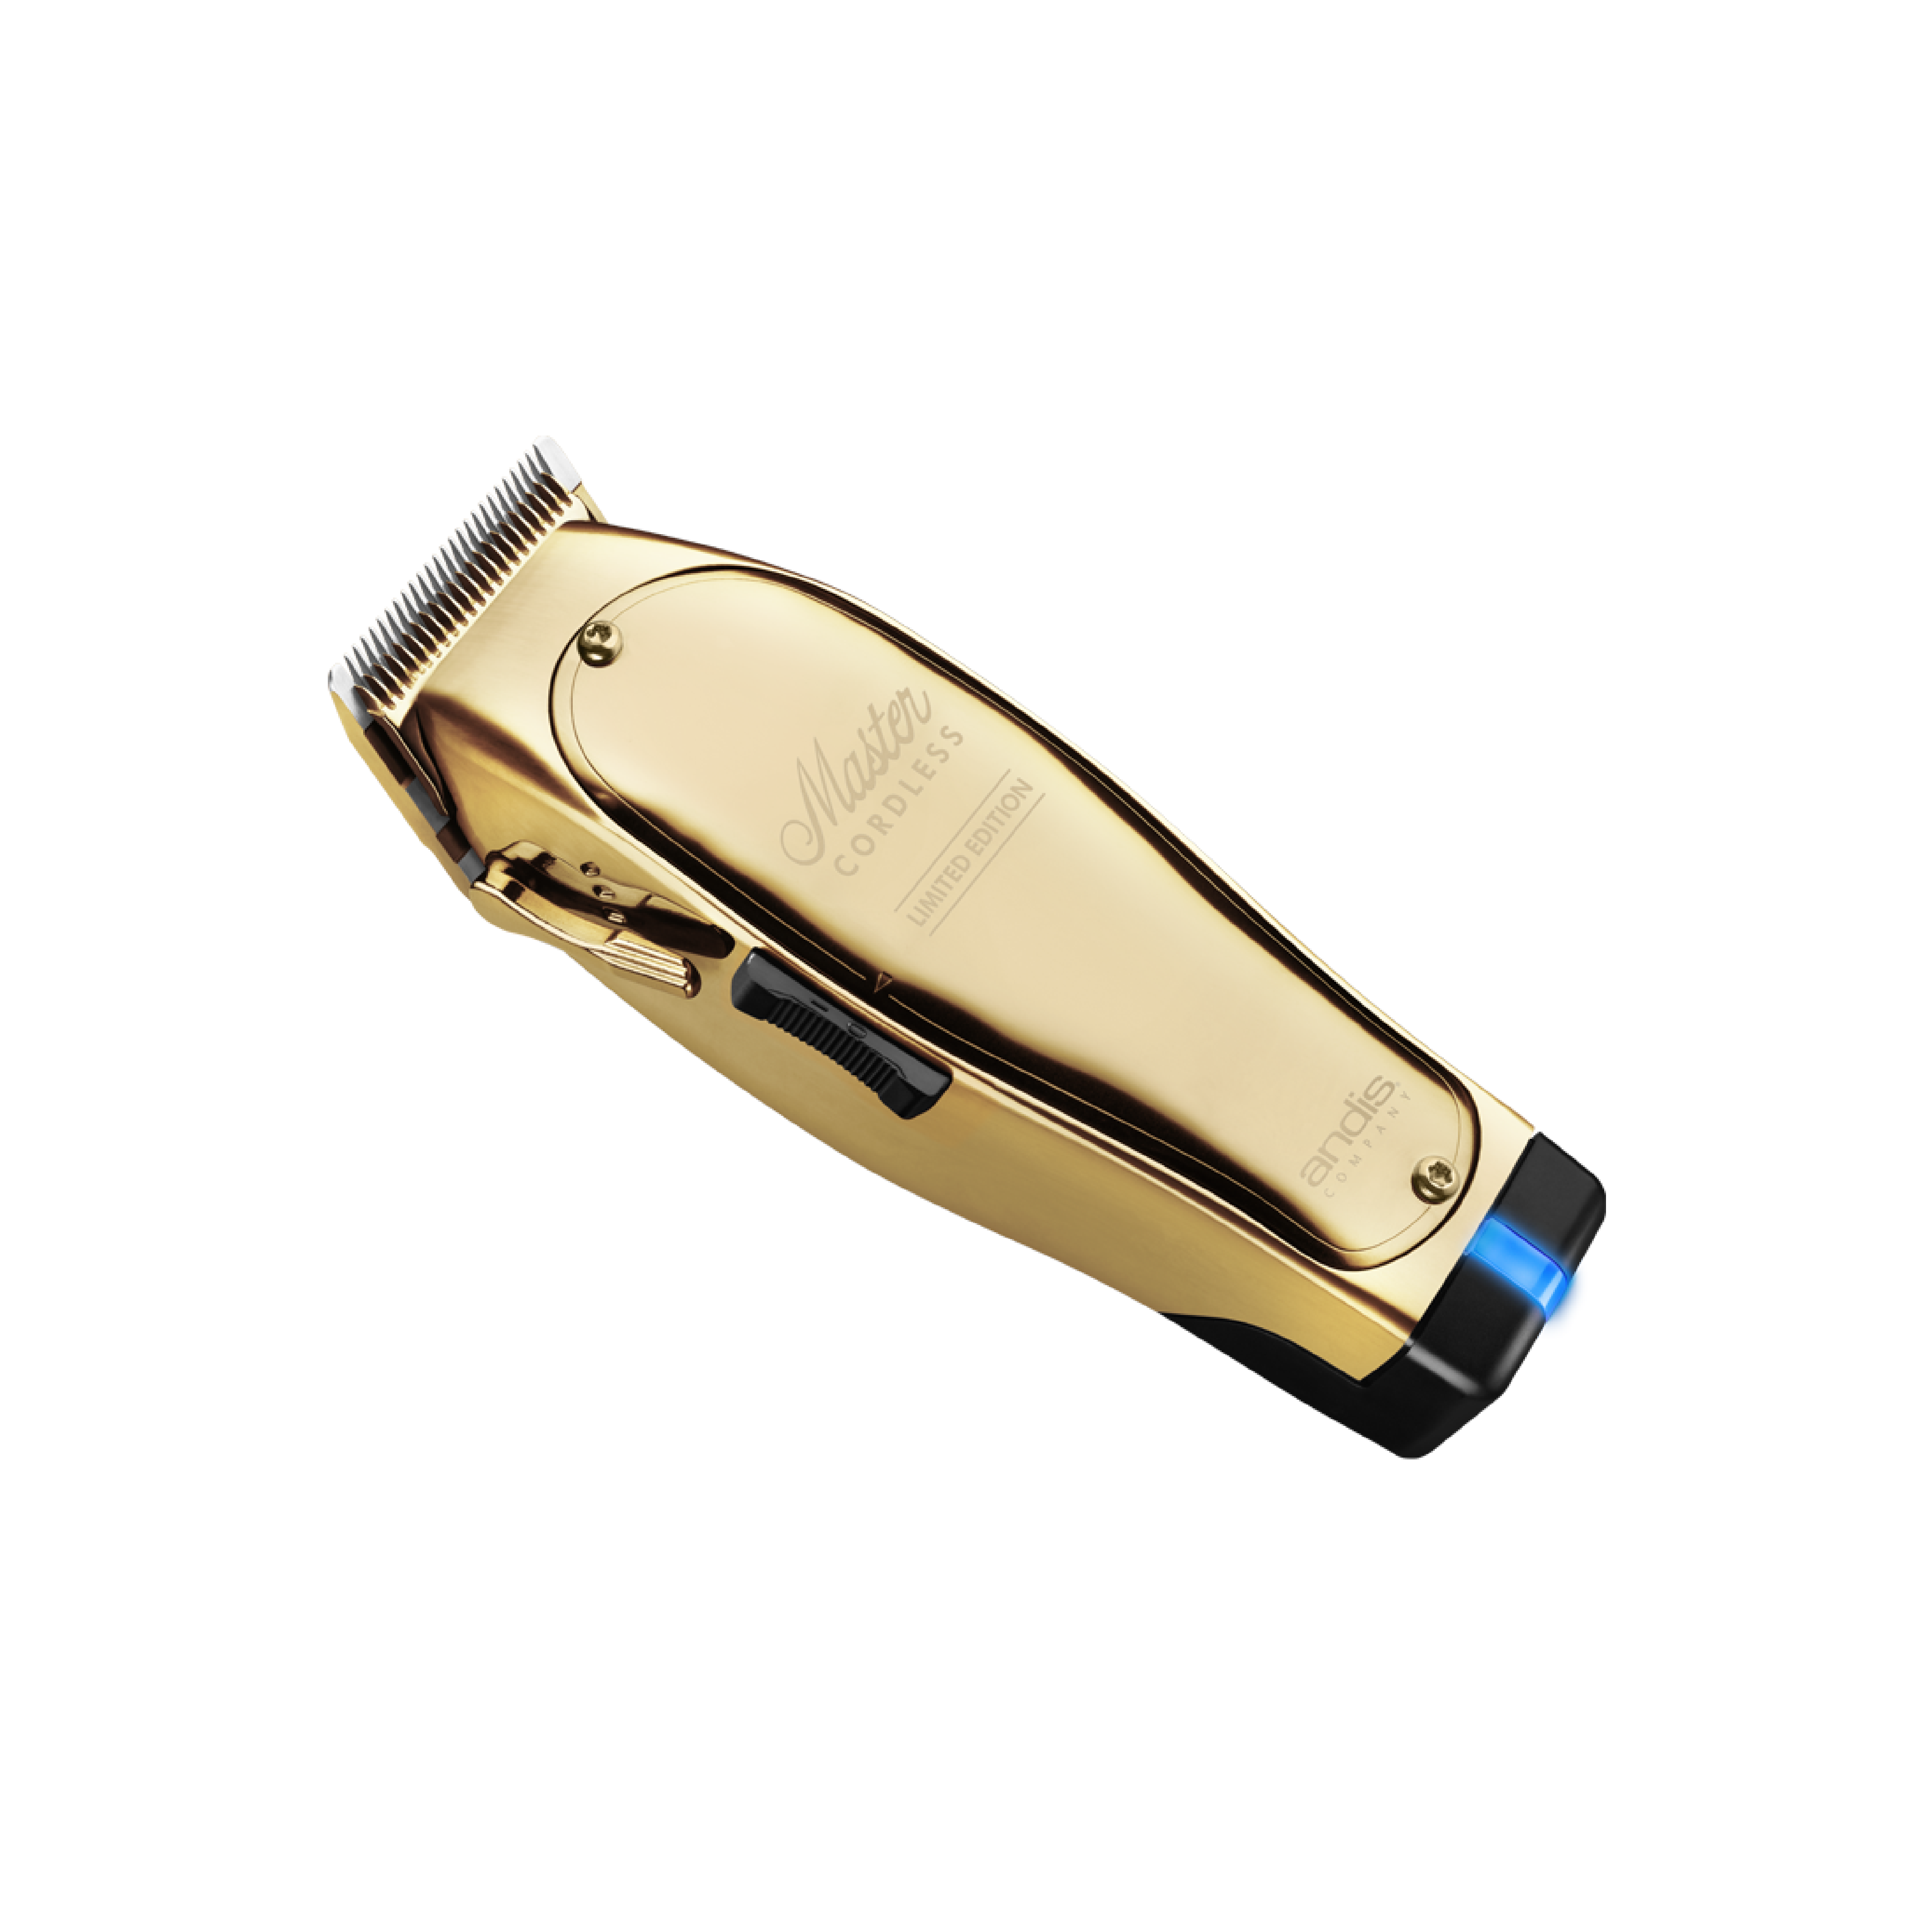 Andis Master Cordless Lithium-ion Limited Edition Gold Clipper - 12540